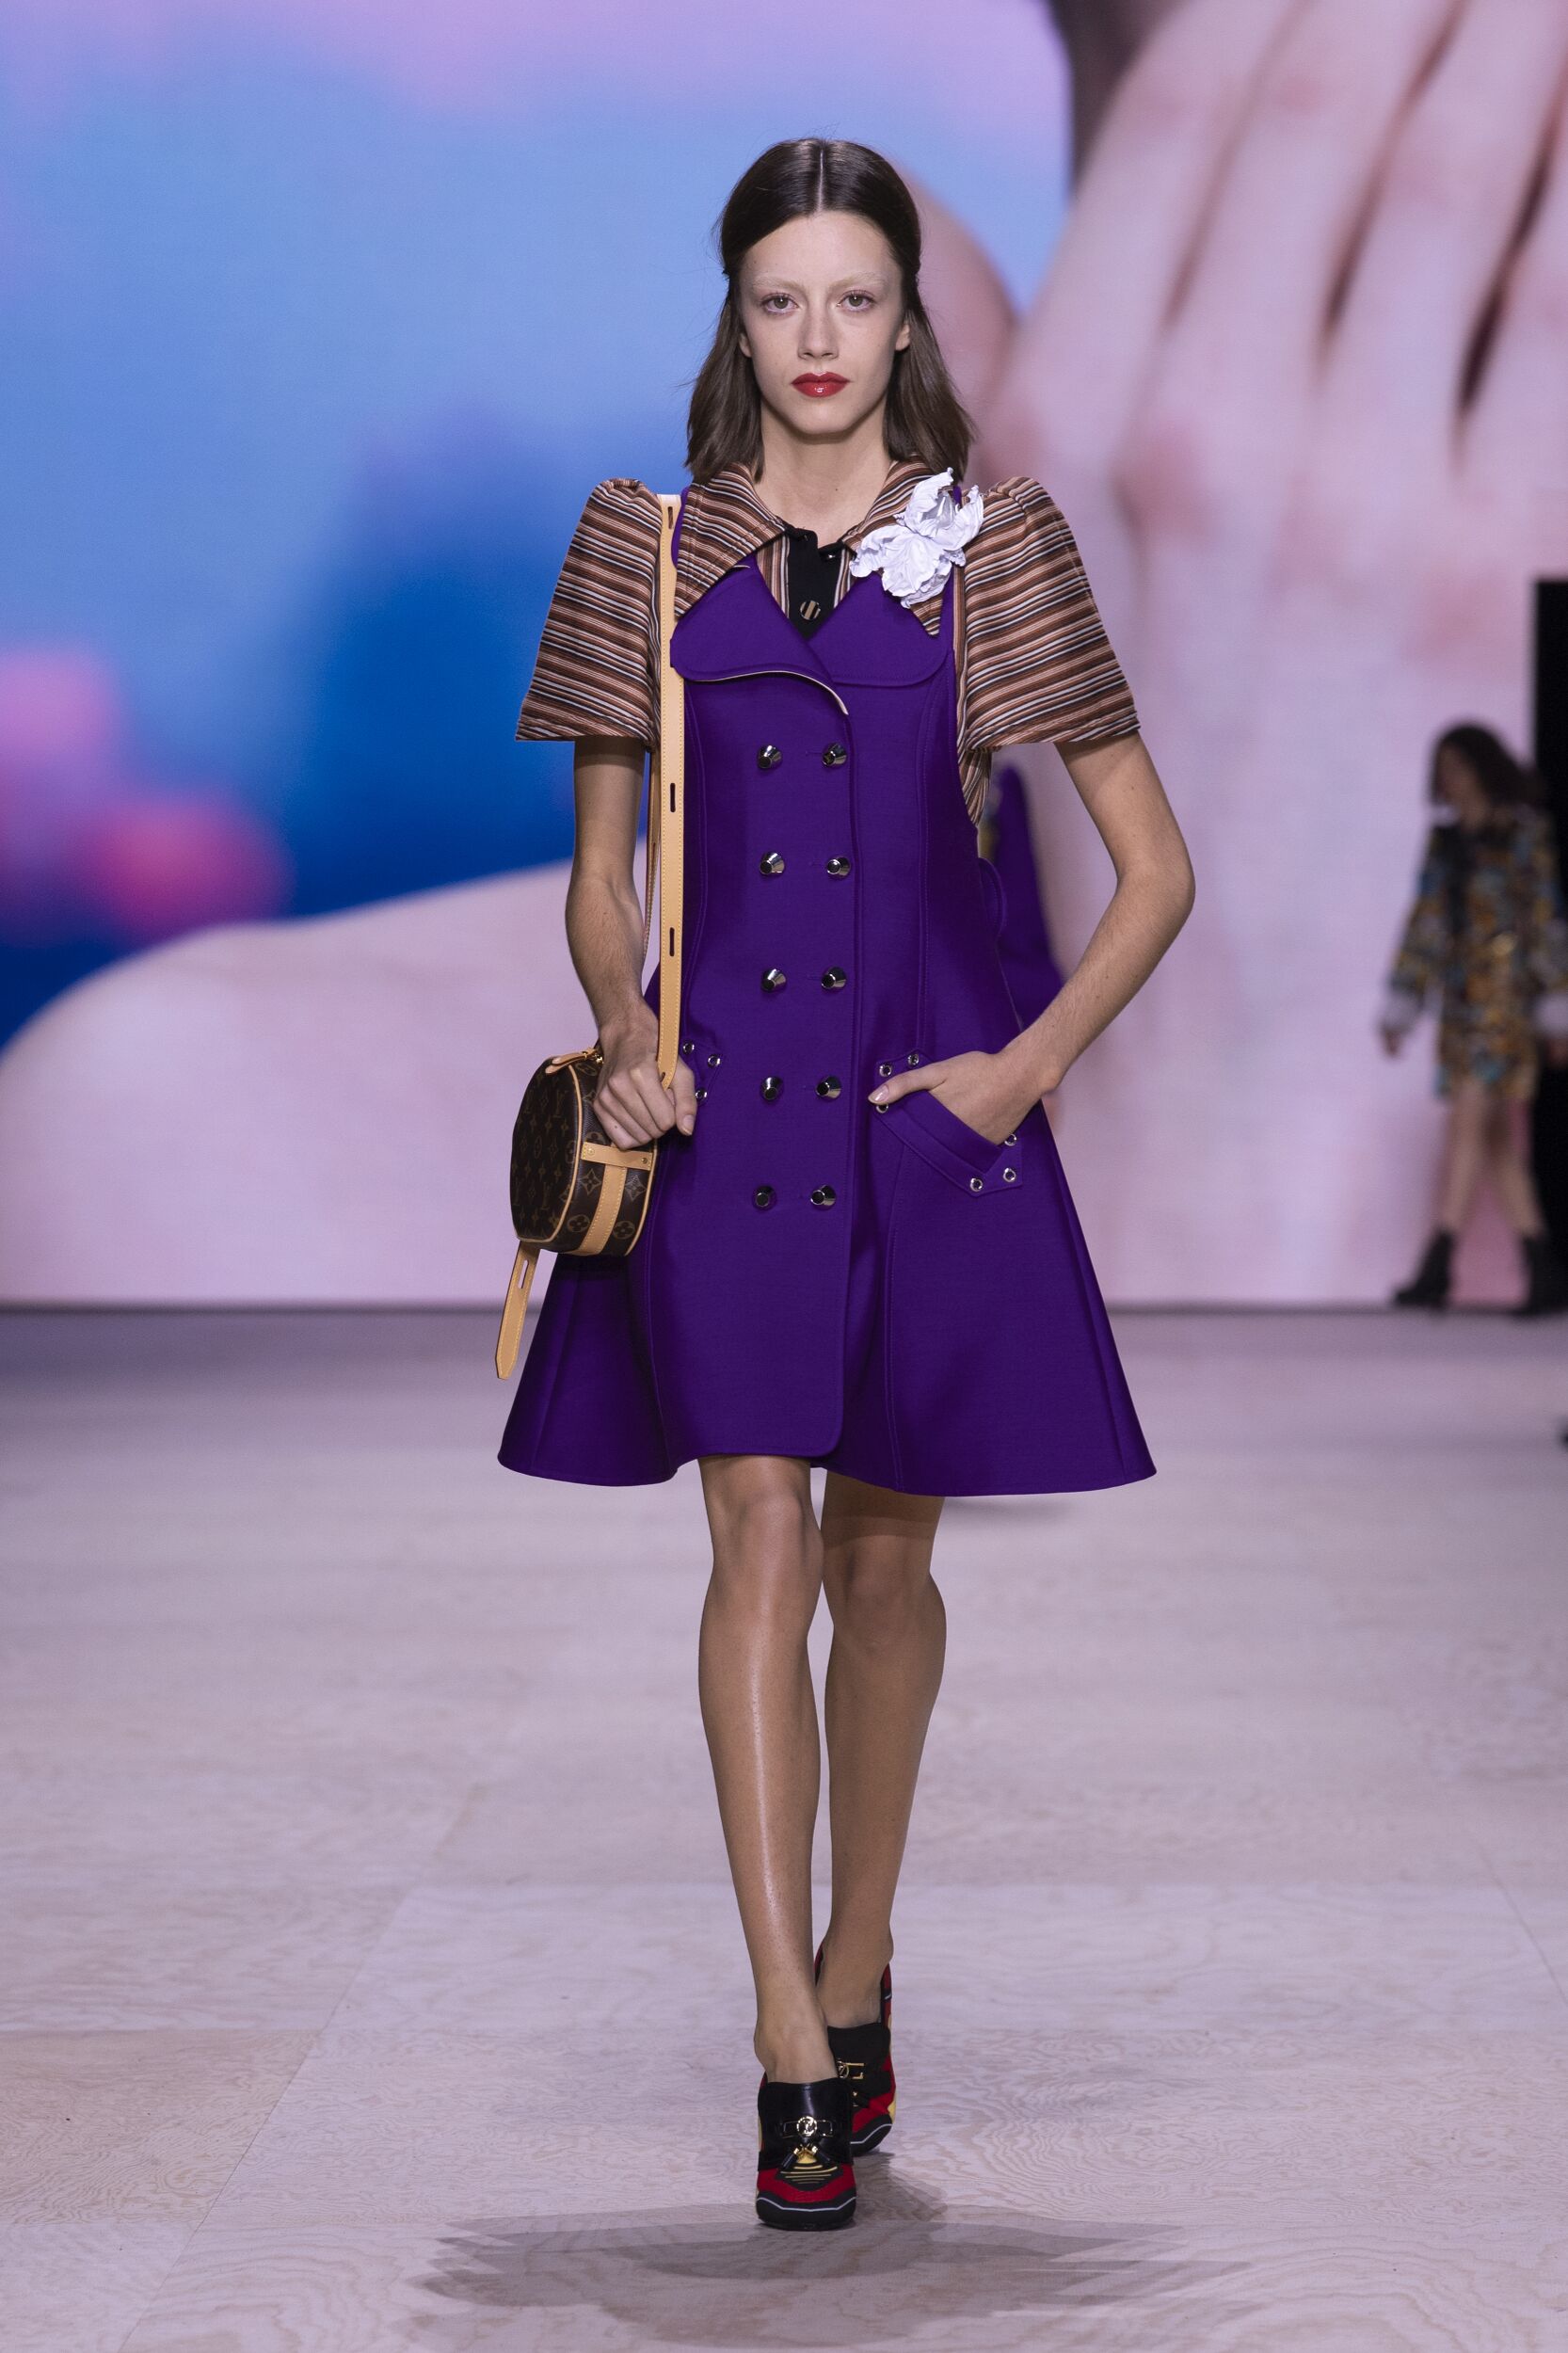 LOUIS VUITTON SPRING SUMMER 2020 WOMEN’S COLLECTION | The Skinny Beep